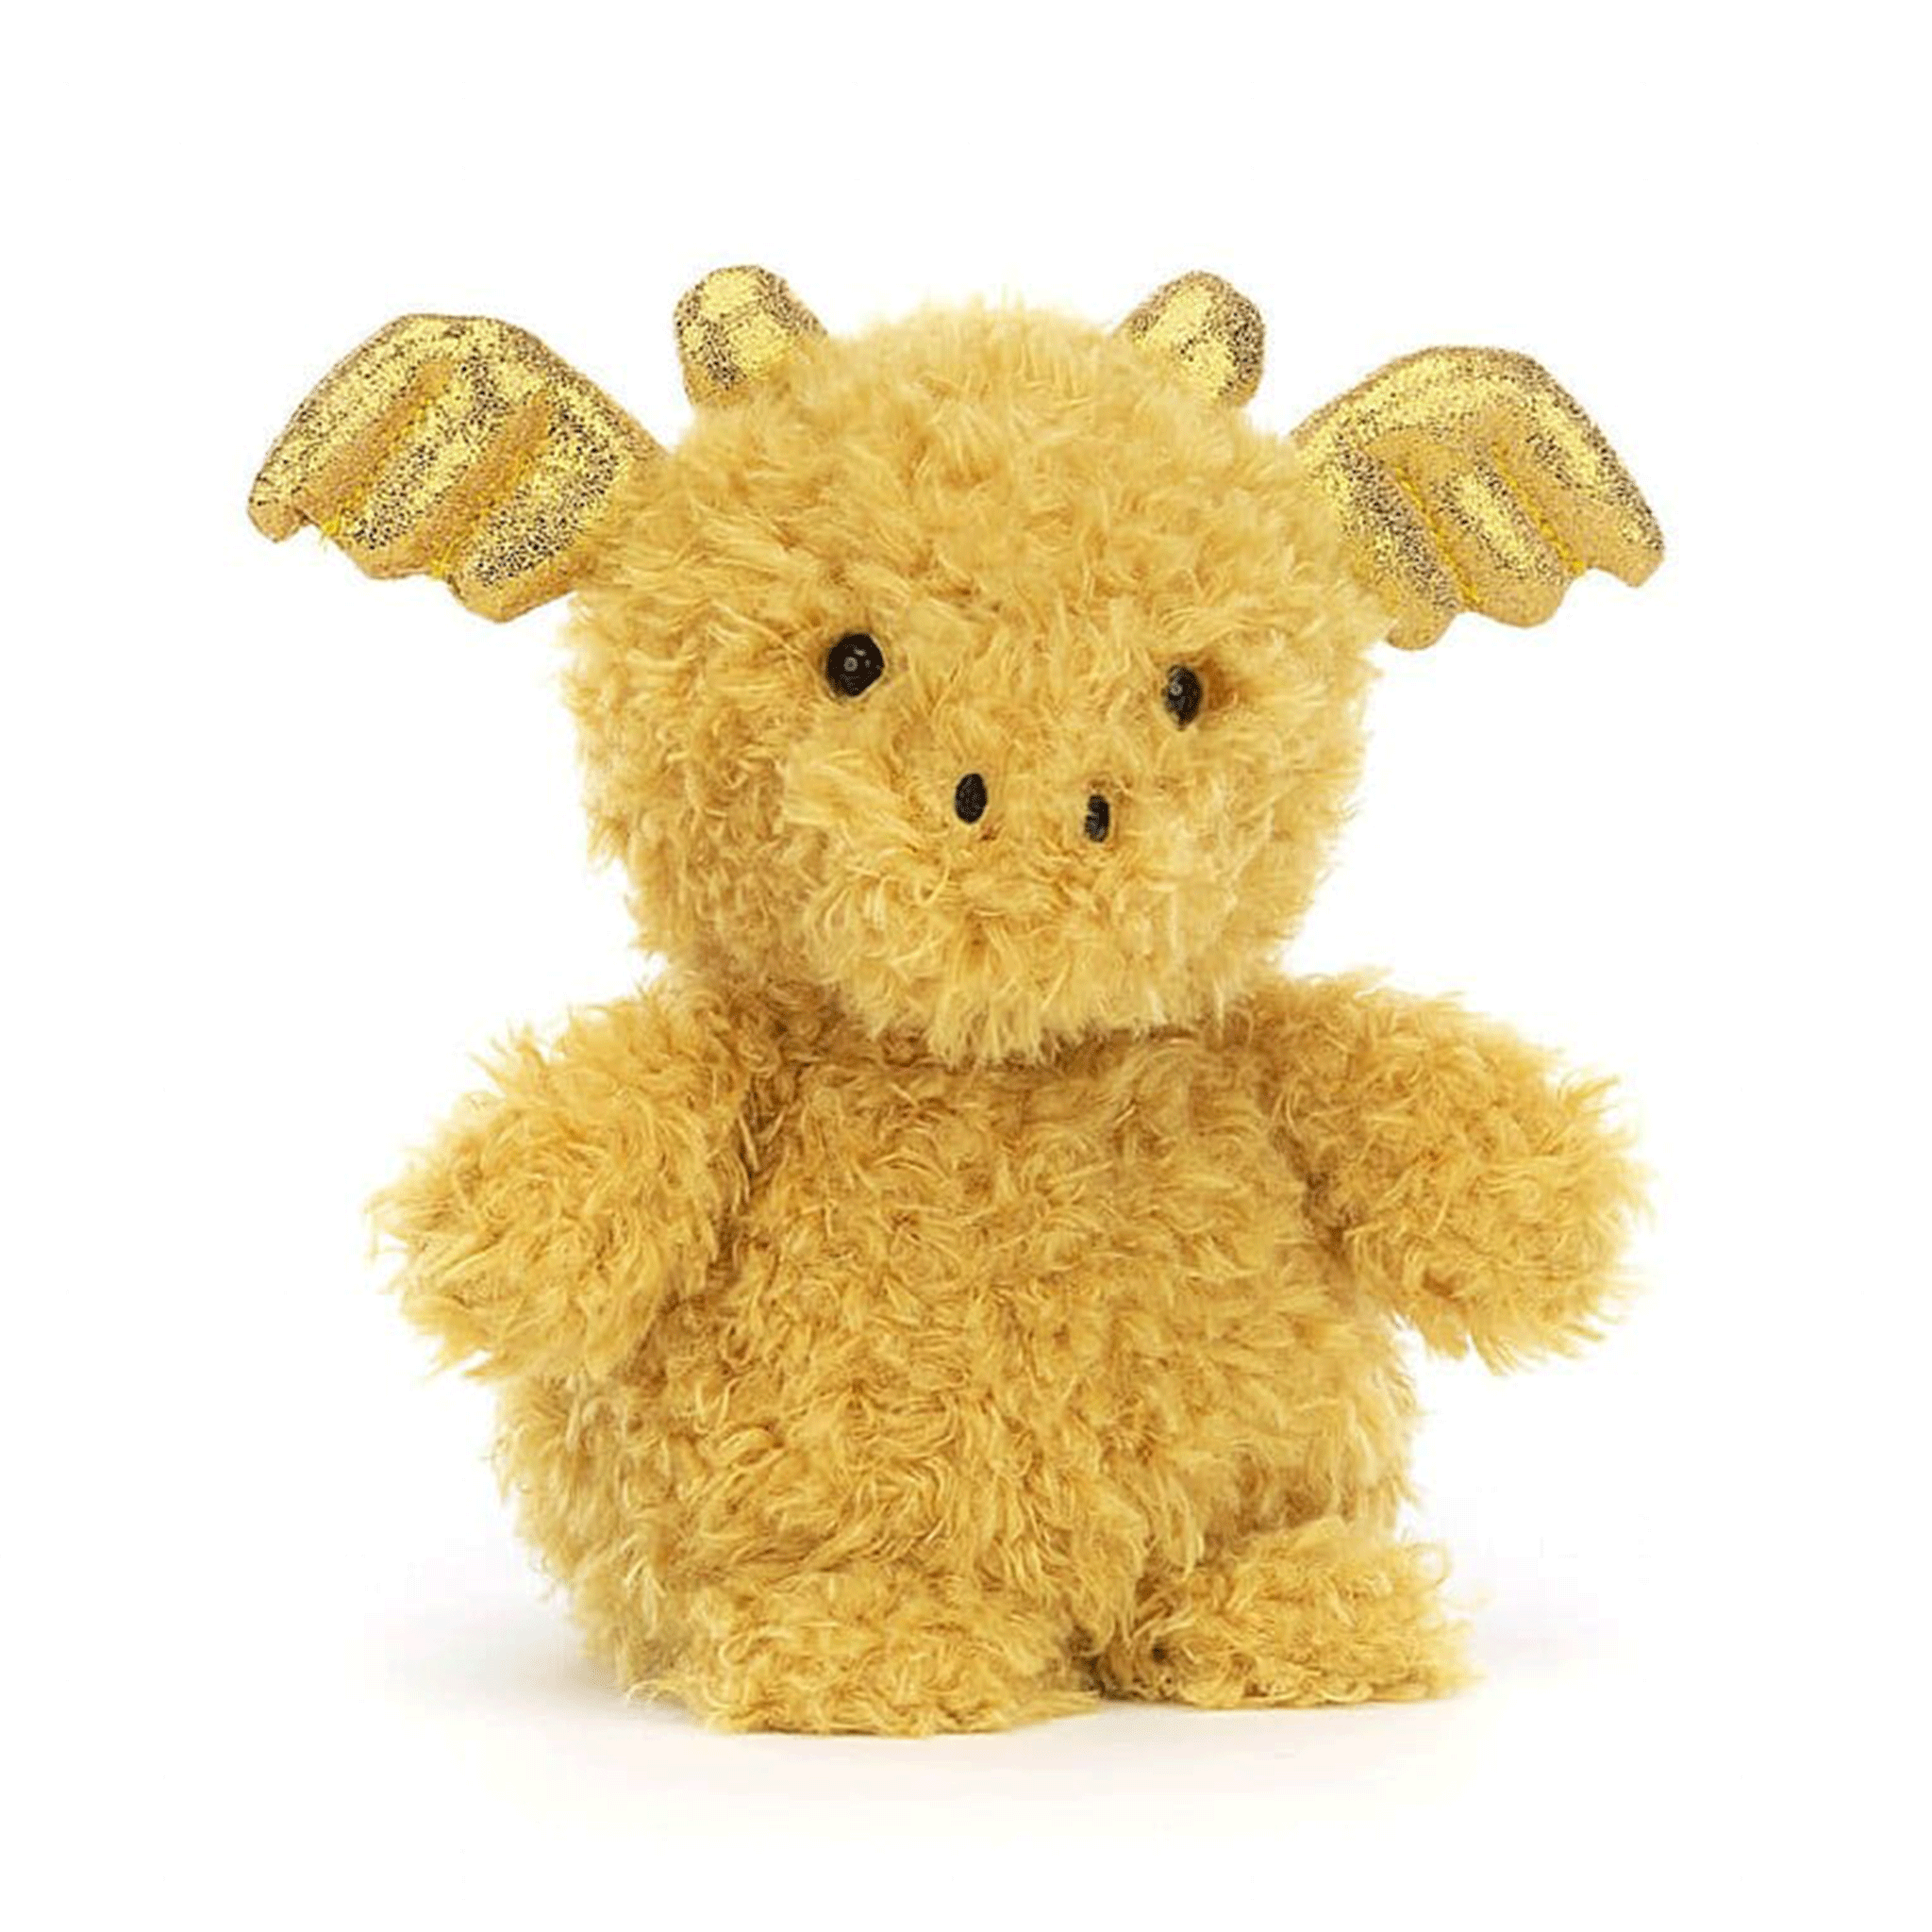 On a white background is a fuzzy yellow dragon shaped stuffed animal with gold wing horns. 